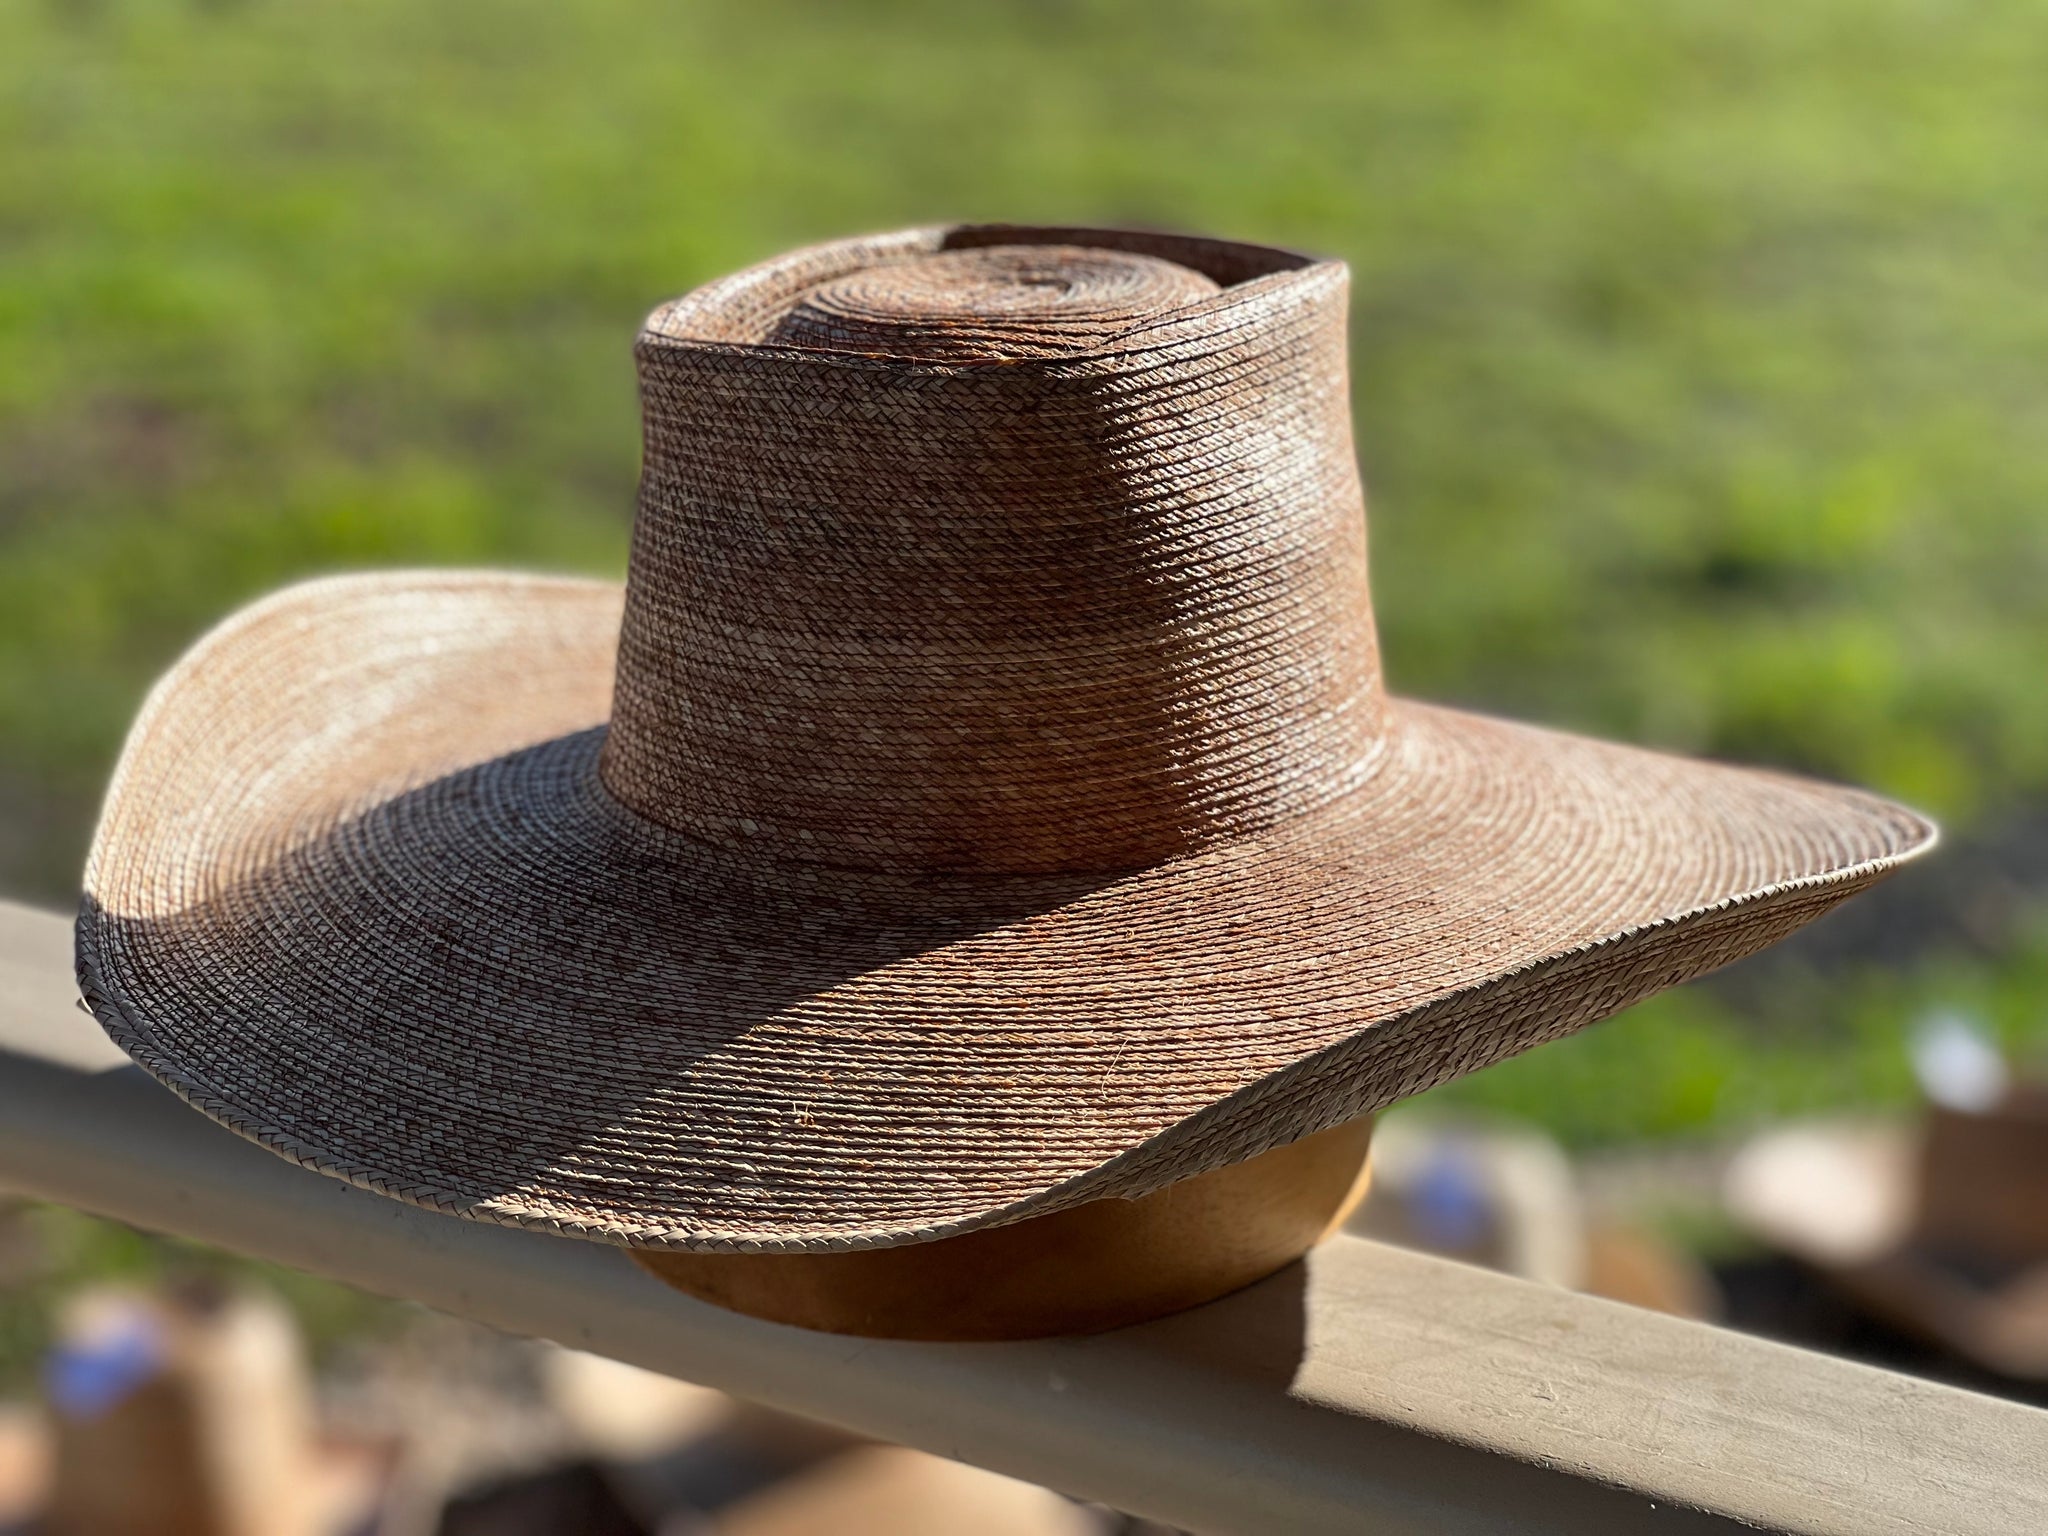 Jaxonbilt_Hats_are_Australian_made_palm_leaf_hats_and_crossbred_hats_for_cowgirls_and_cowboys_with_wide_brims_for_sun_protection_5”_brim_trim_on_edge_wide_crown_band_box_top_shape_dark_oak_5”_brim